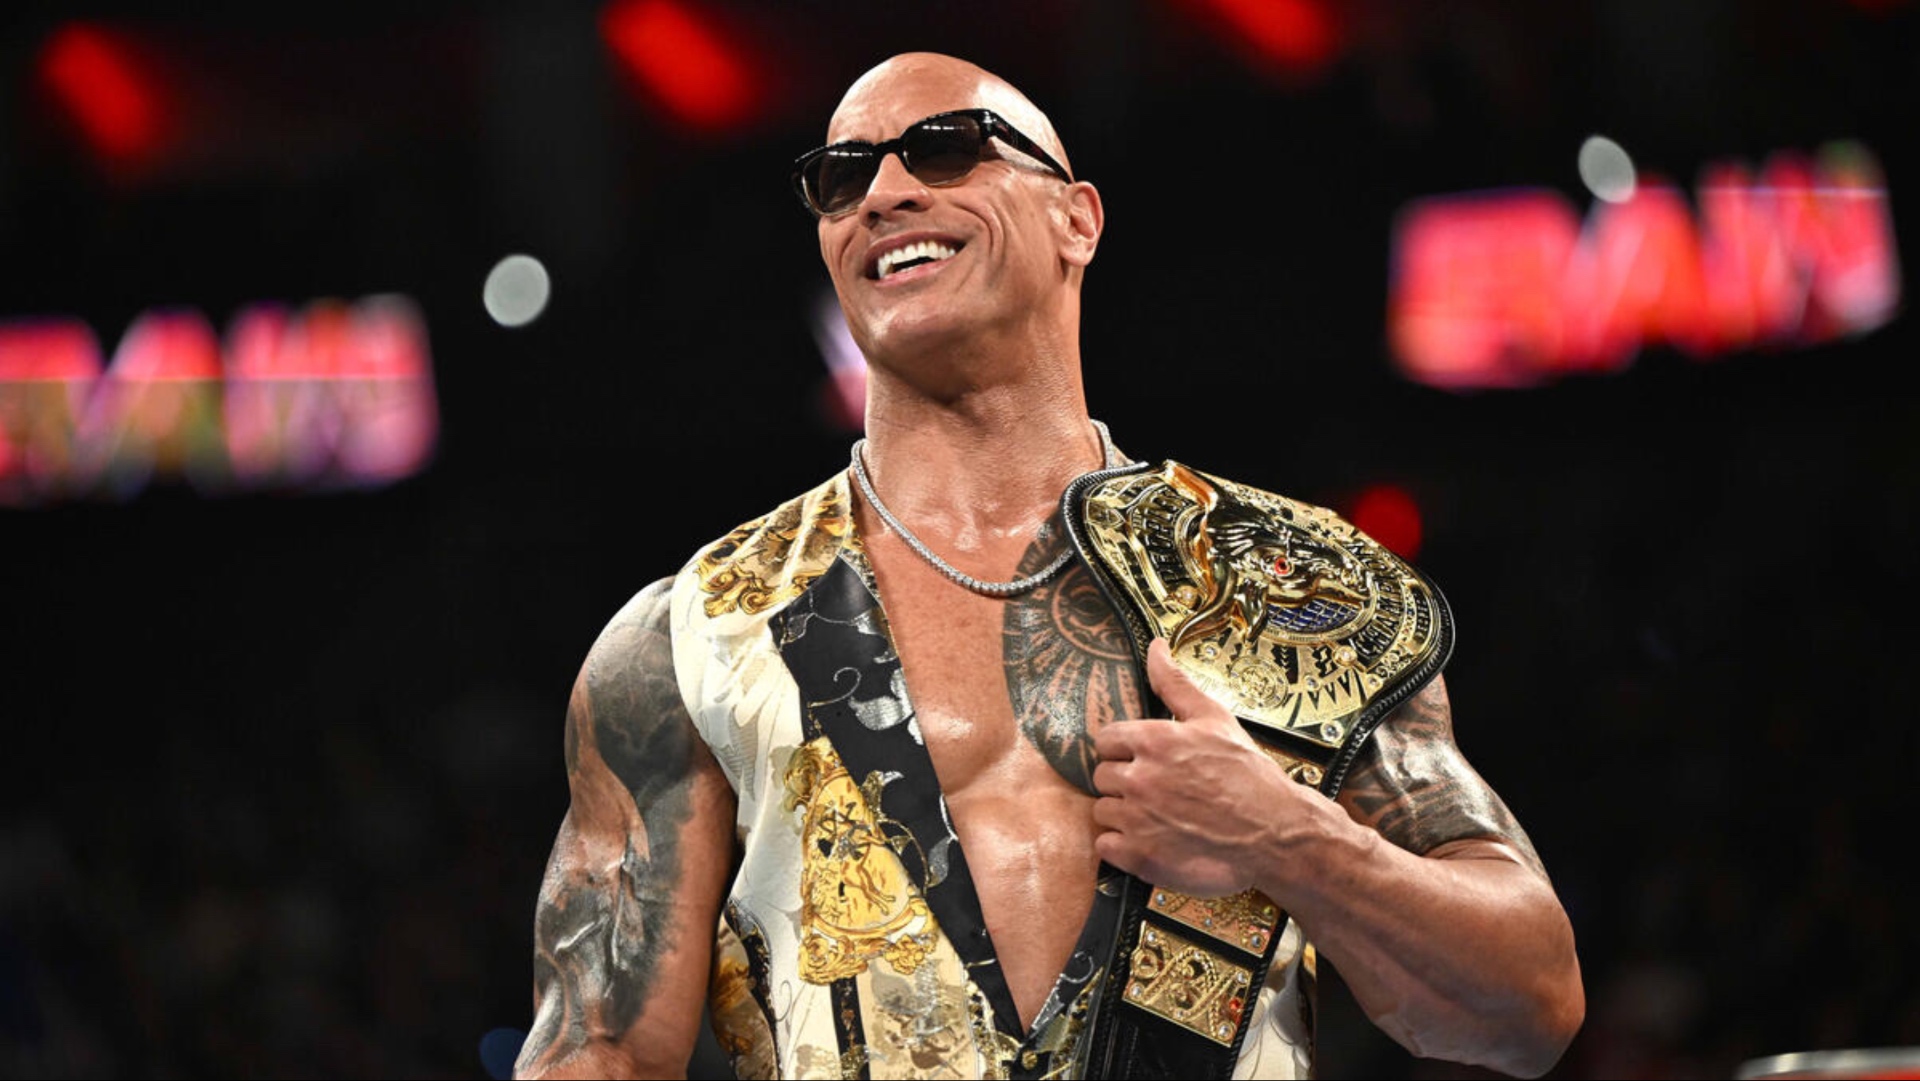 The Rock breaks character to praise current WWE Superstar